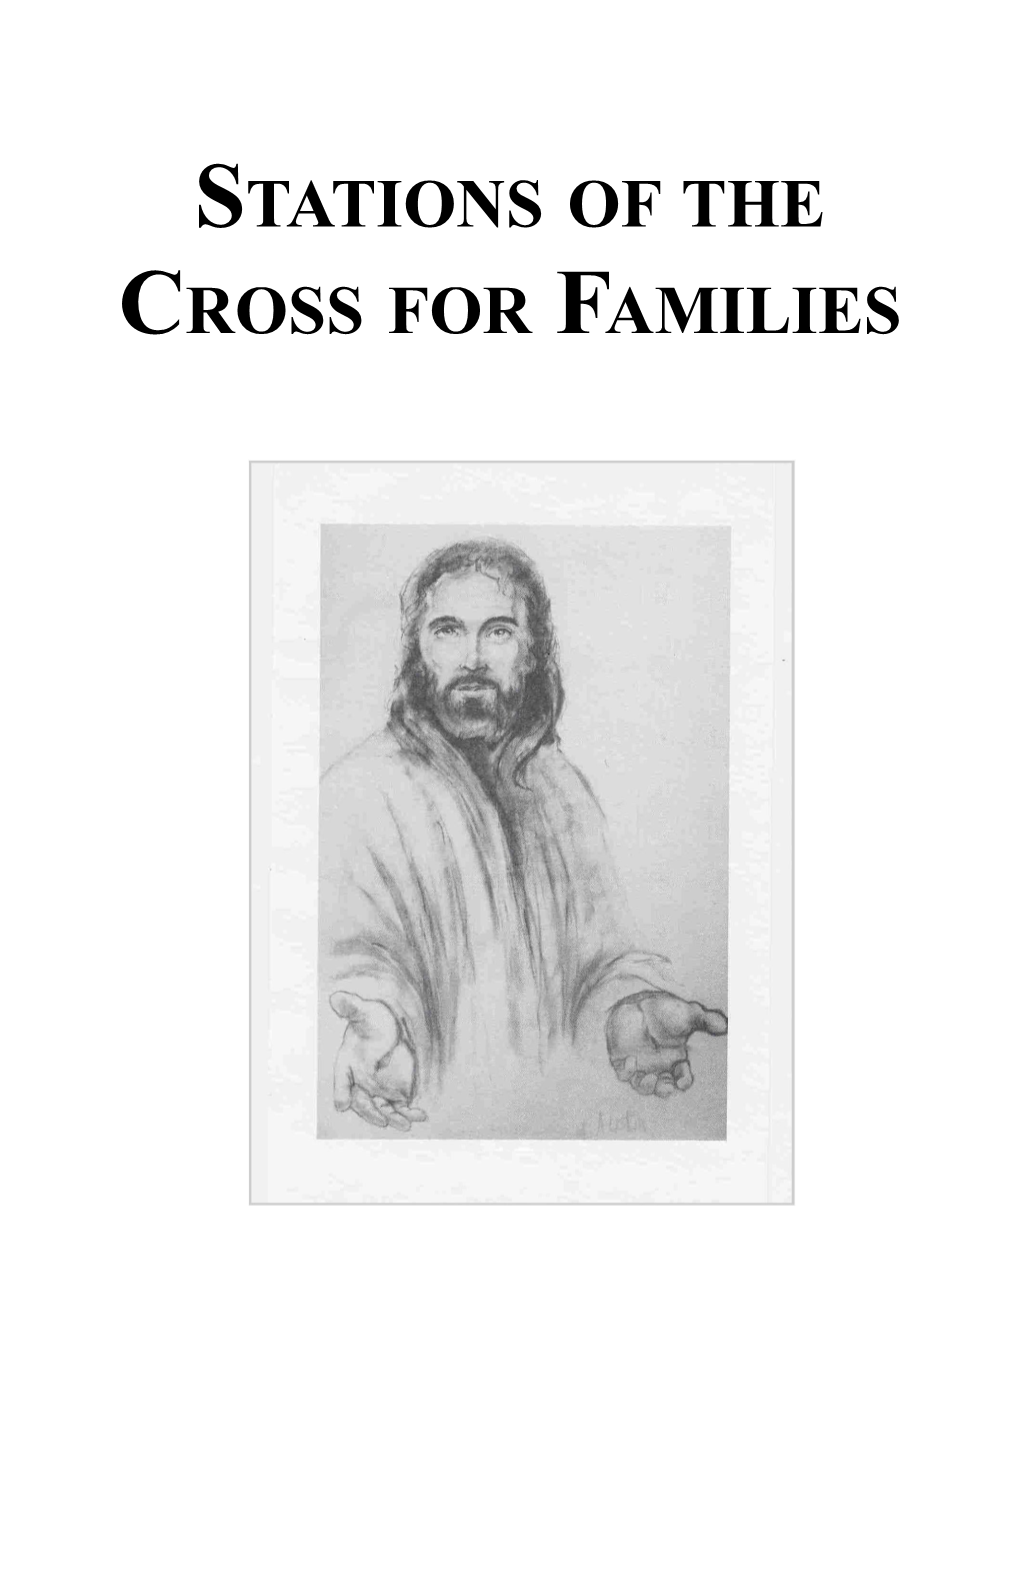 Stations of the Cross for Families